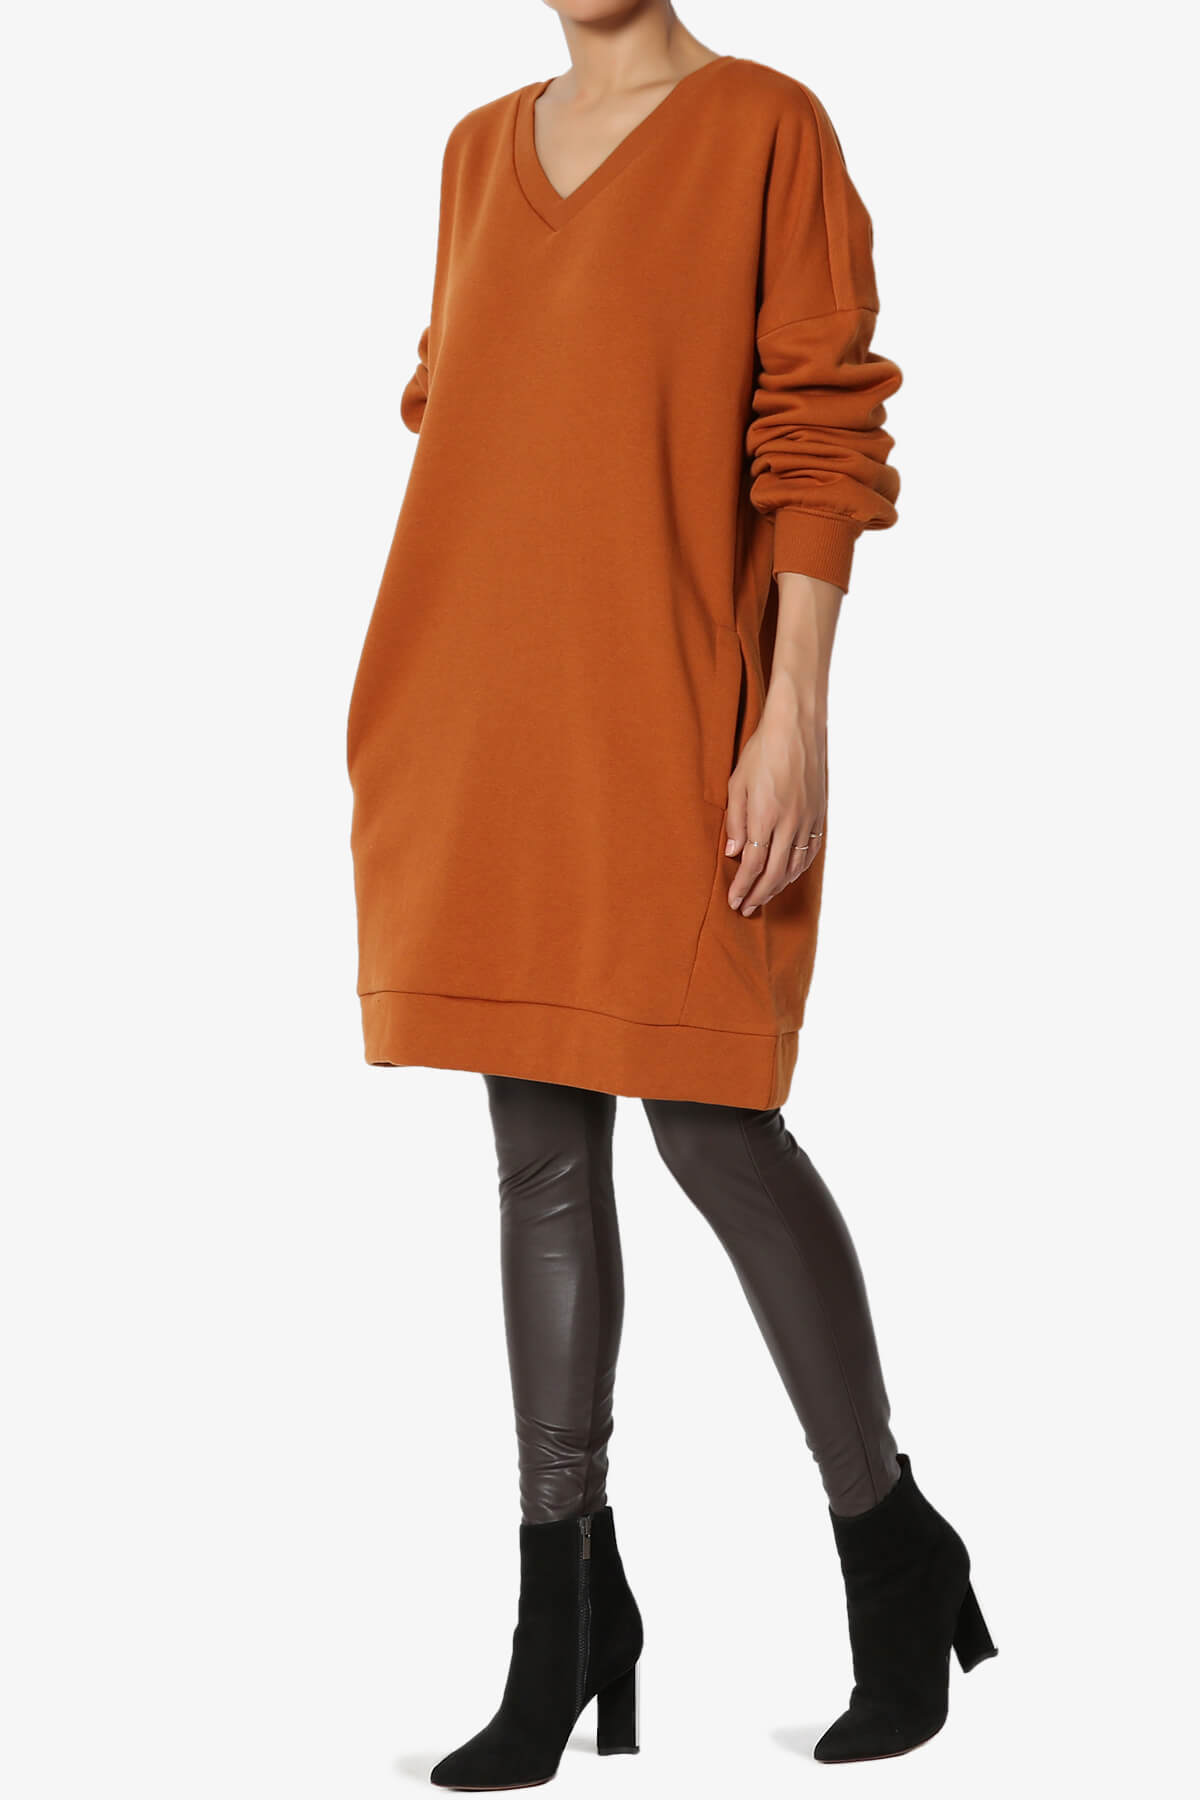 Load image into Gallery viewer, Accie V-Neck Tunic Sweatshirt ALMOND_3
